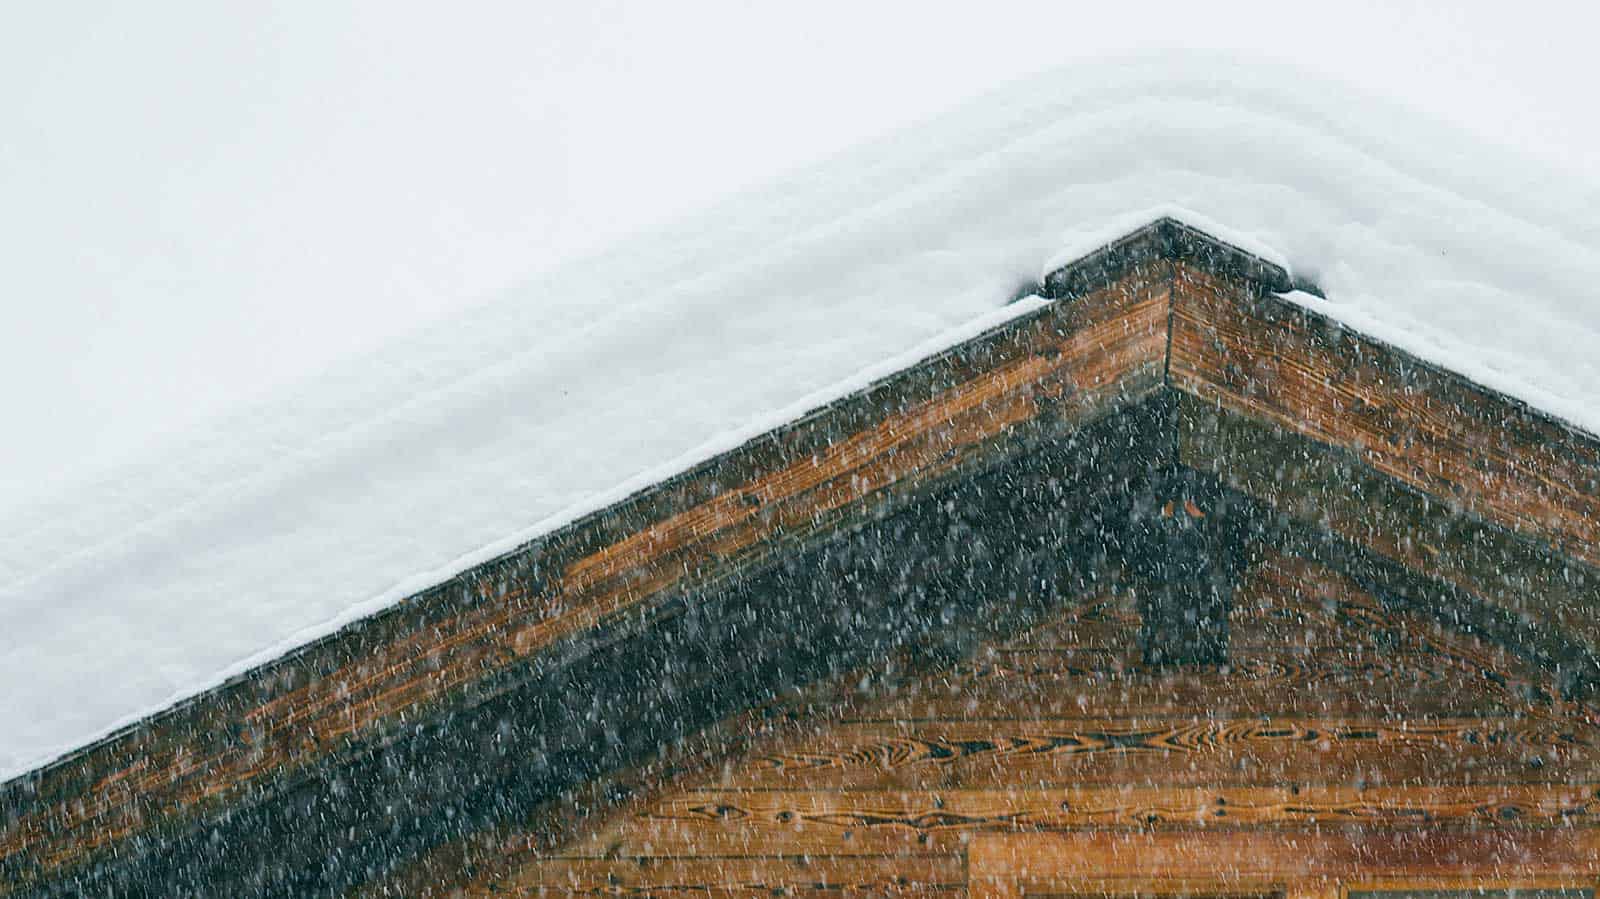 Winter is coming. Get prepared by winterizing your roof today.